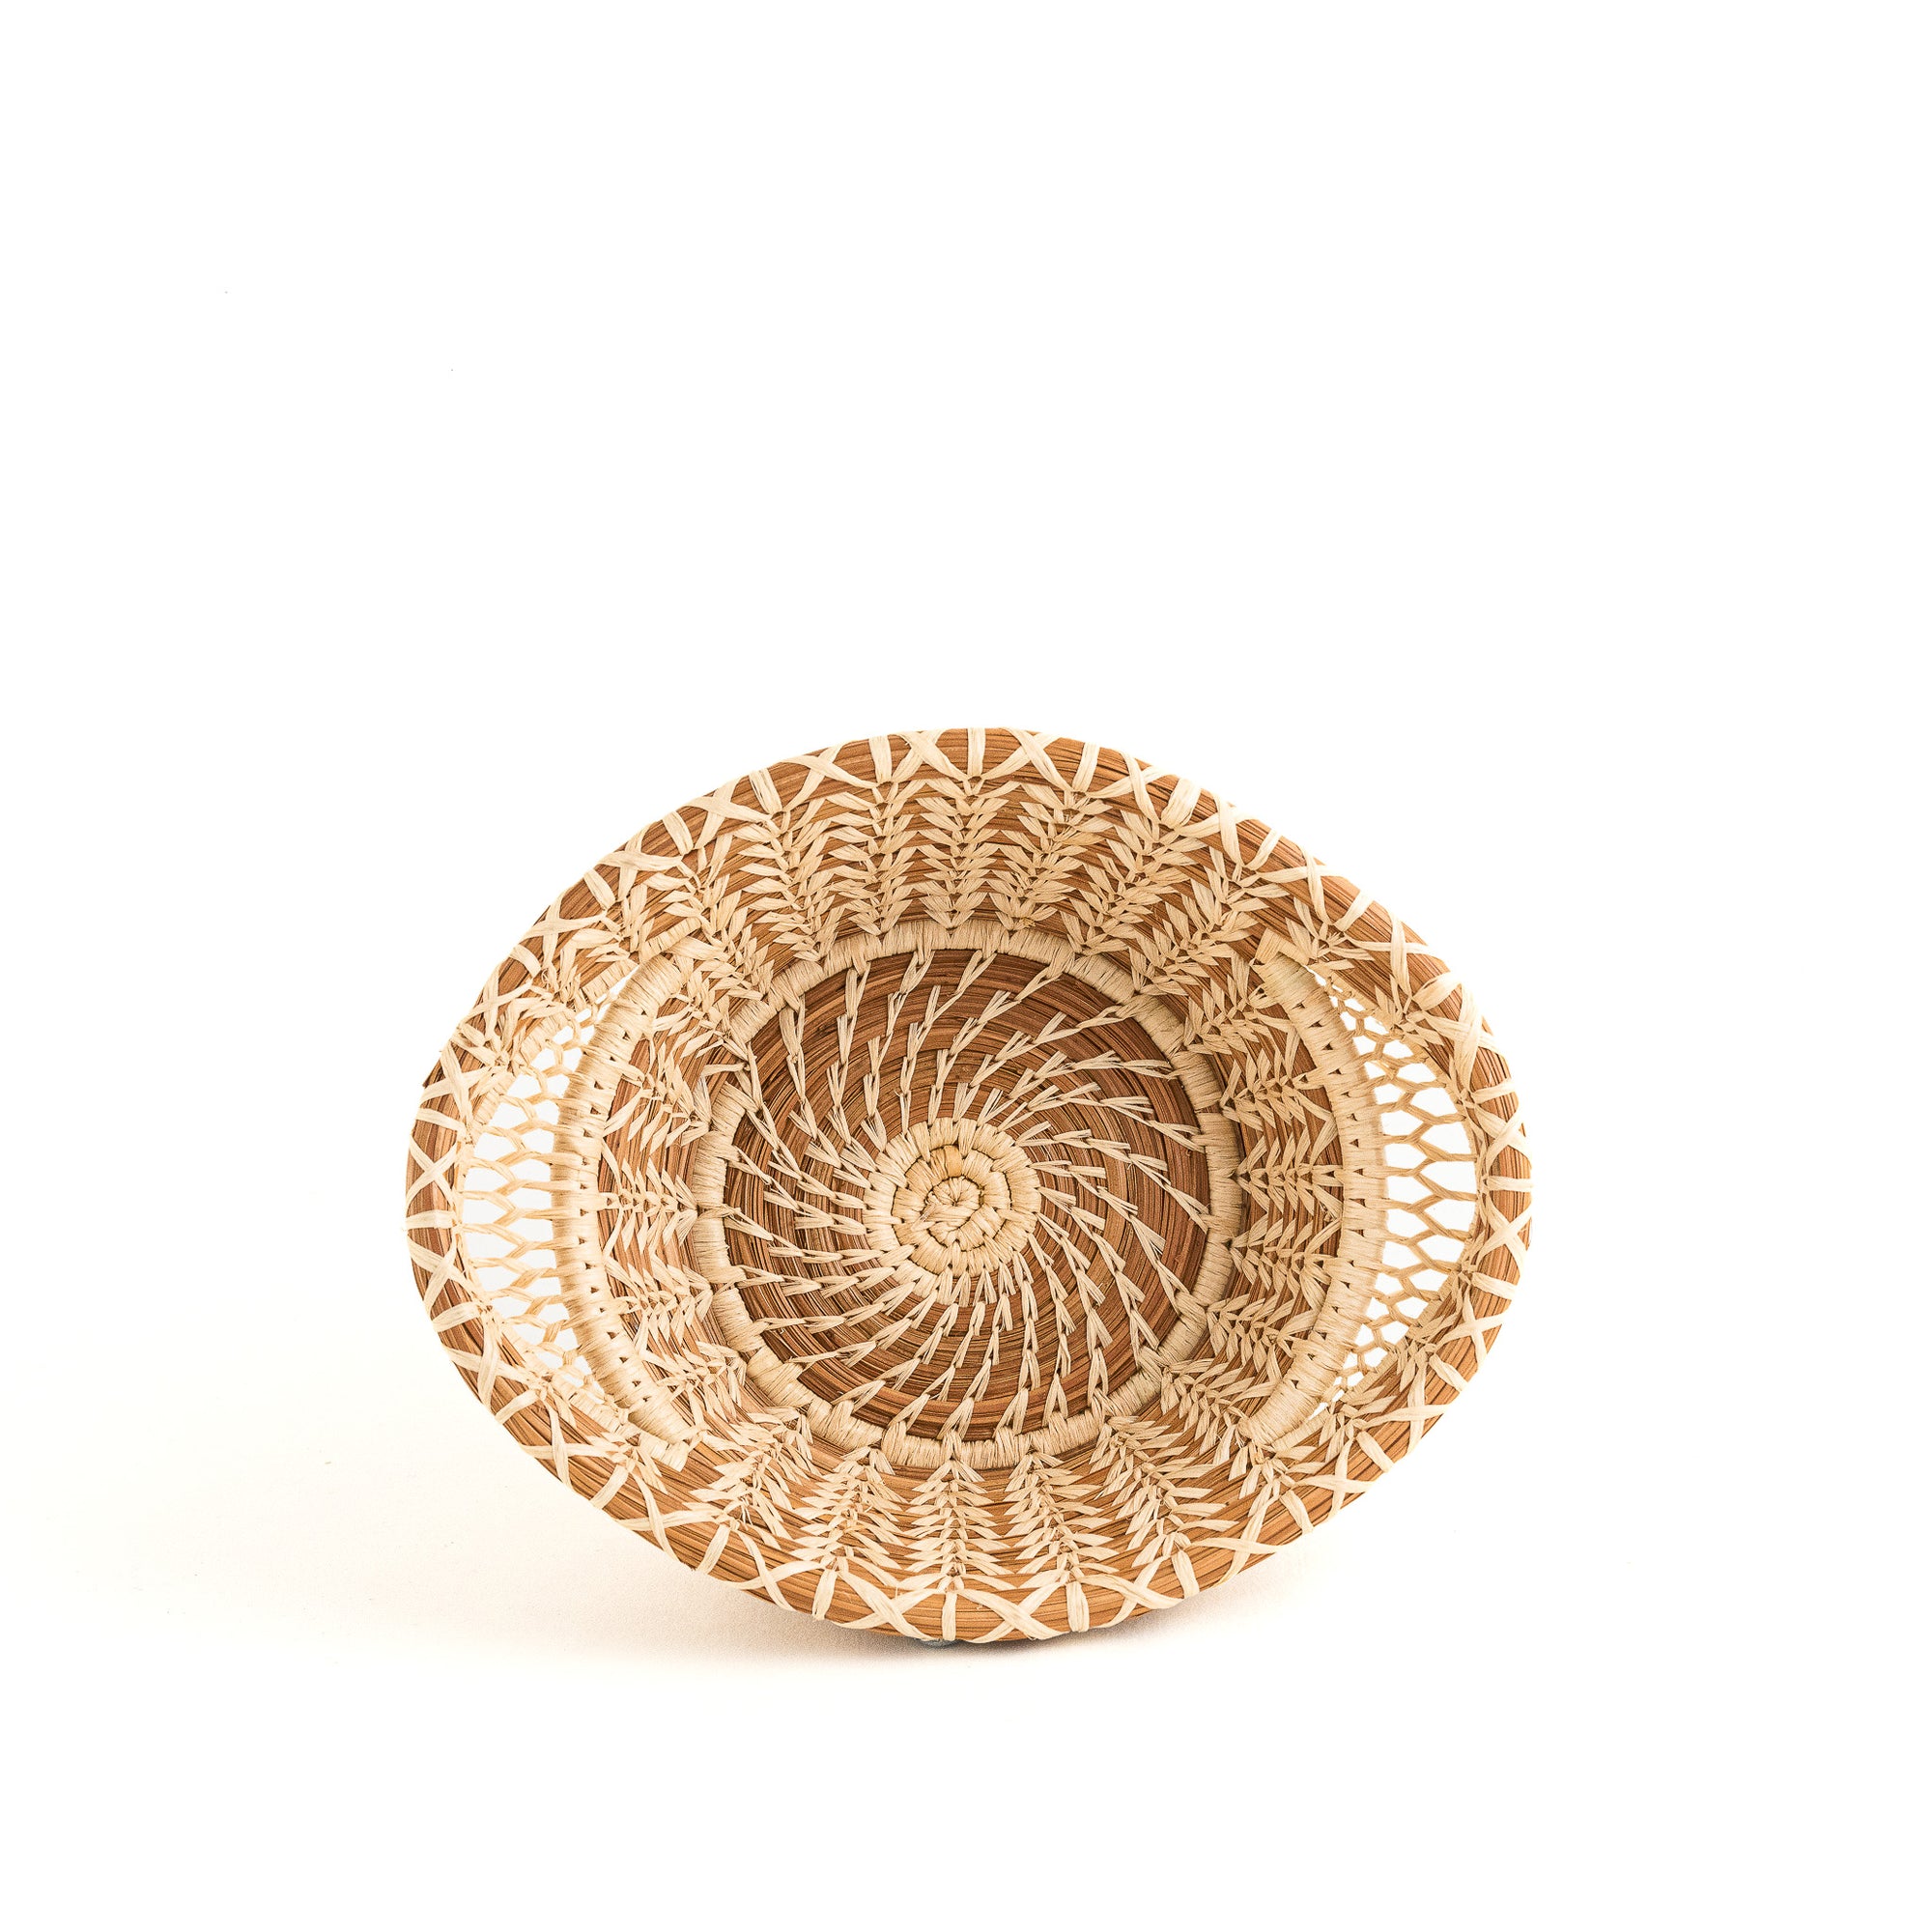 Small Pine Needle Basket with Lacy Handles